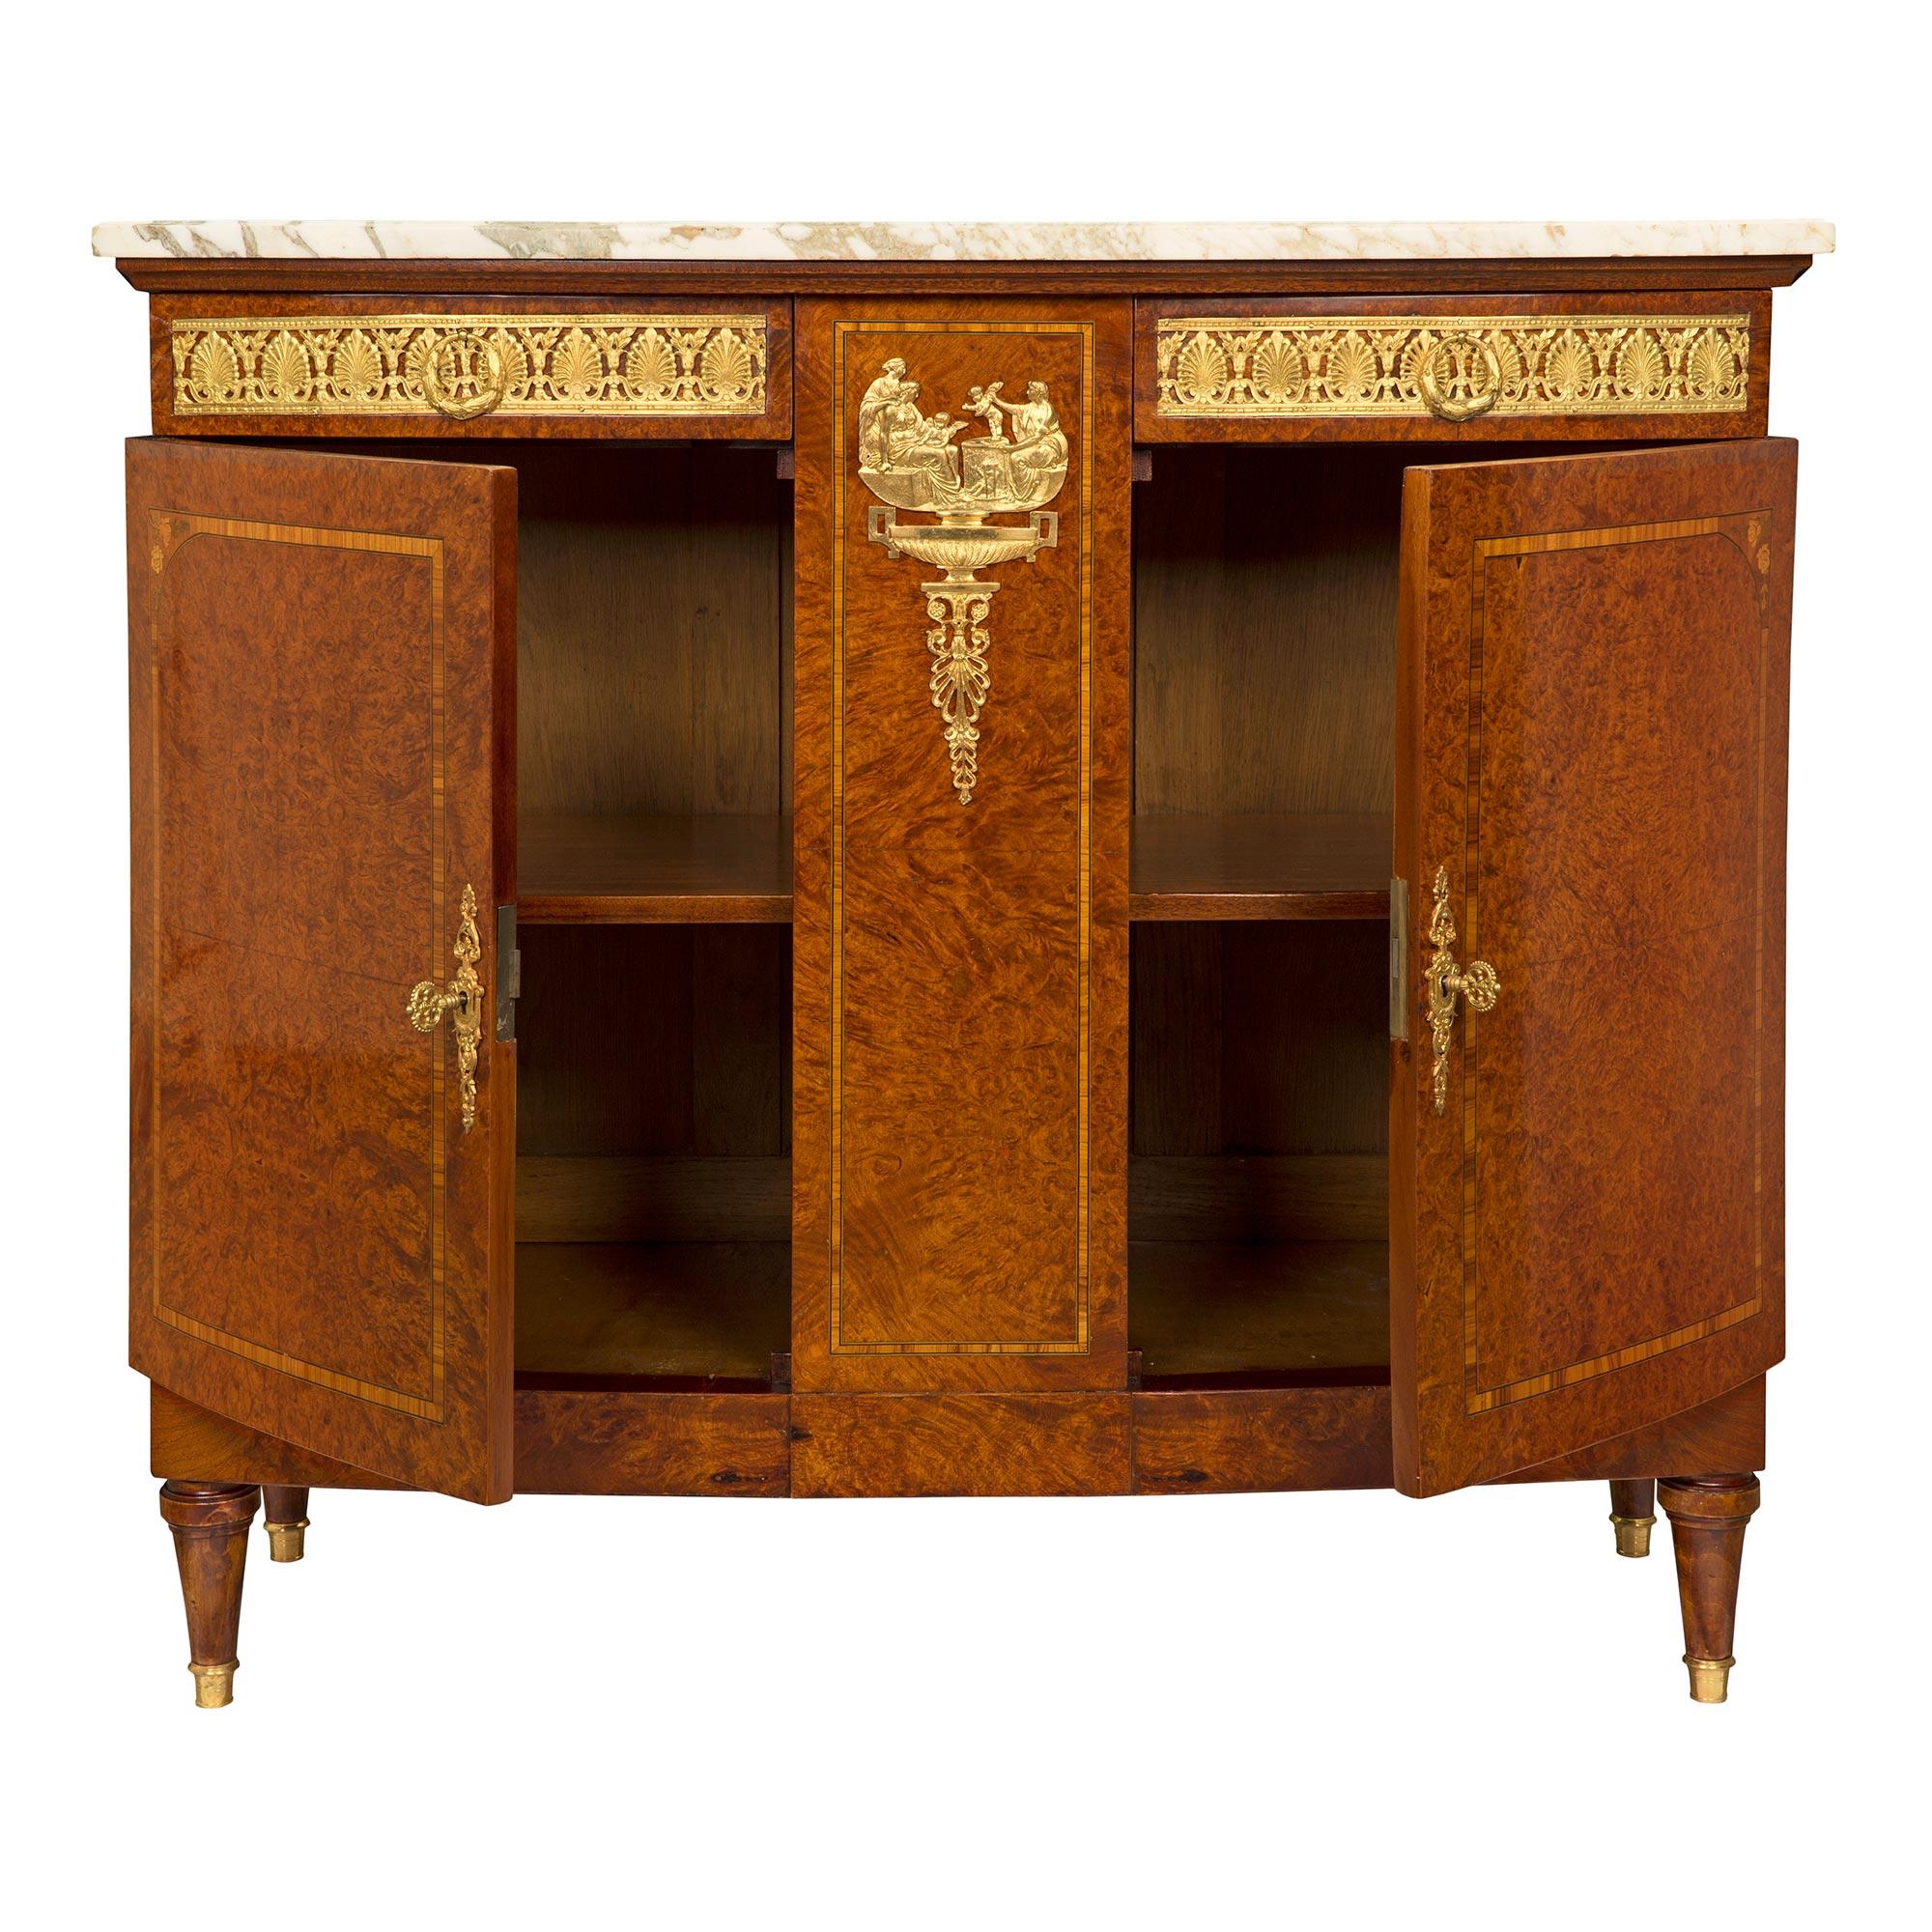 French 19th Century Neoclassical Style Burl Walnut, Tulipwood and Ormolu Buffet In Good Condition For Sale In West Palm Beach, FL